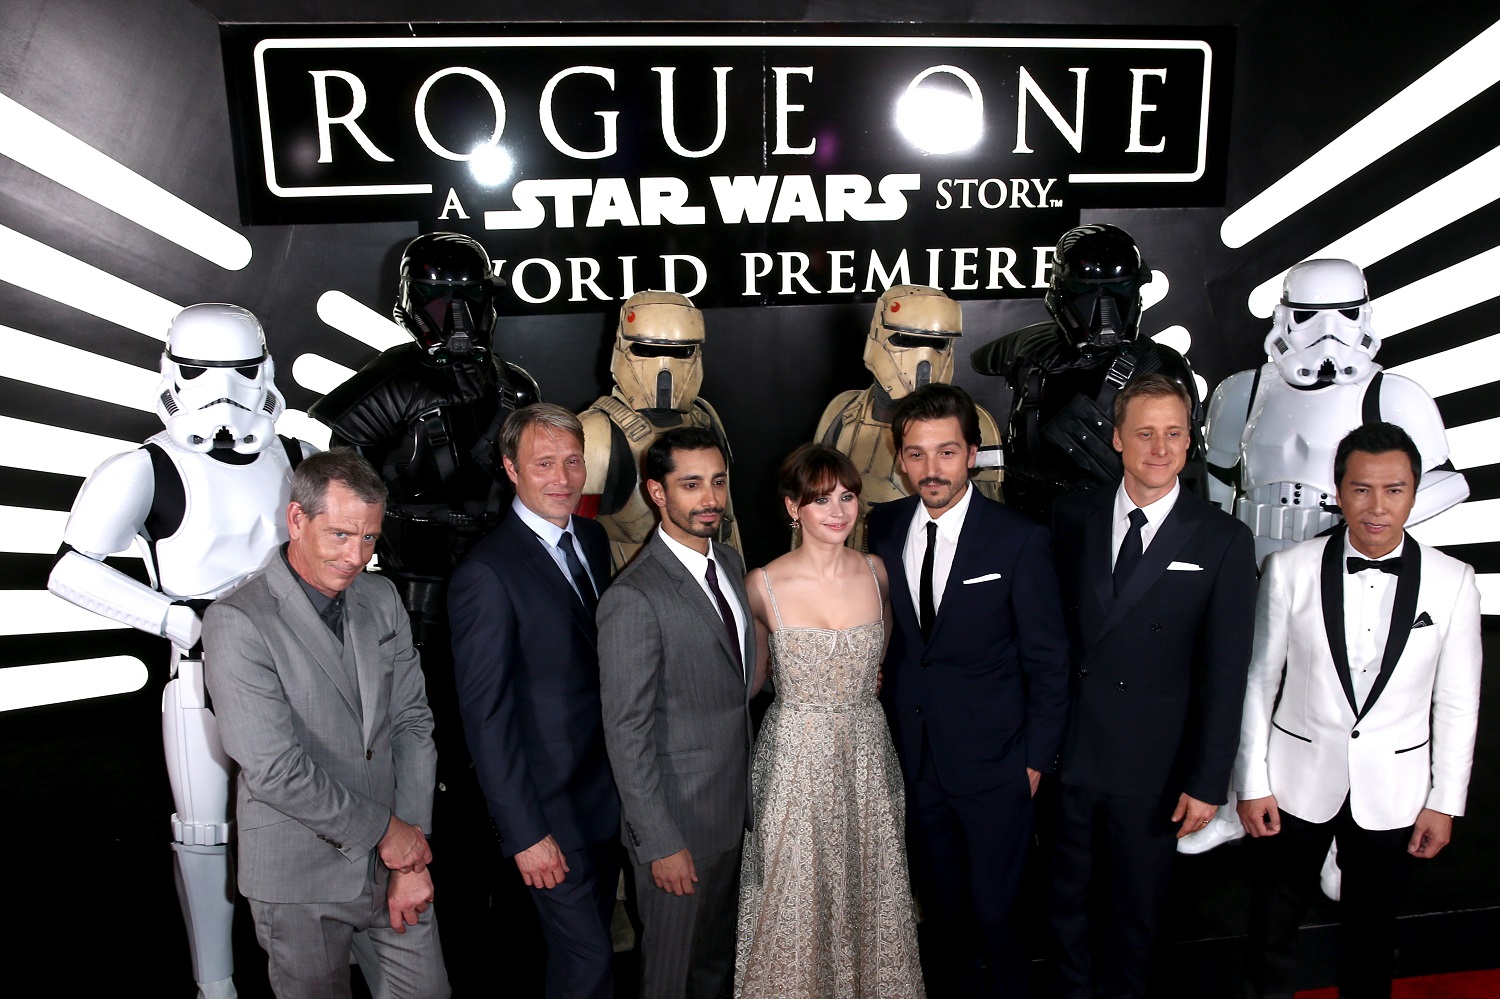 Rogue One Star Wars story premiere photos